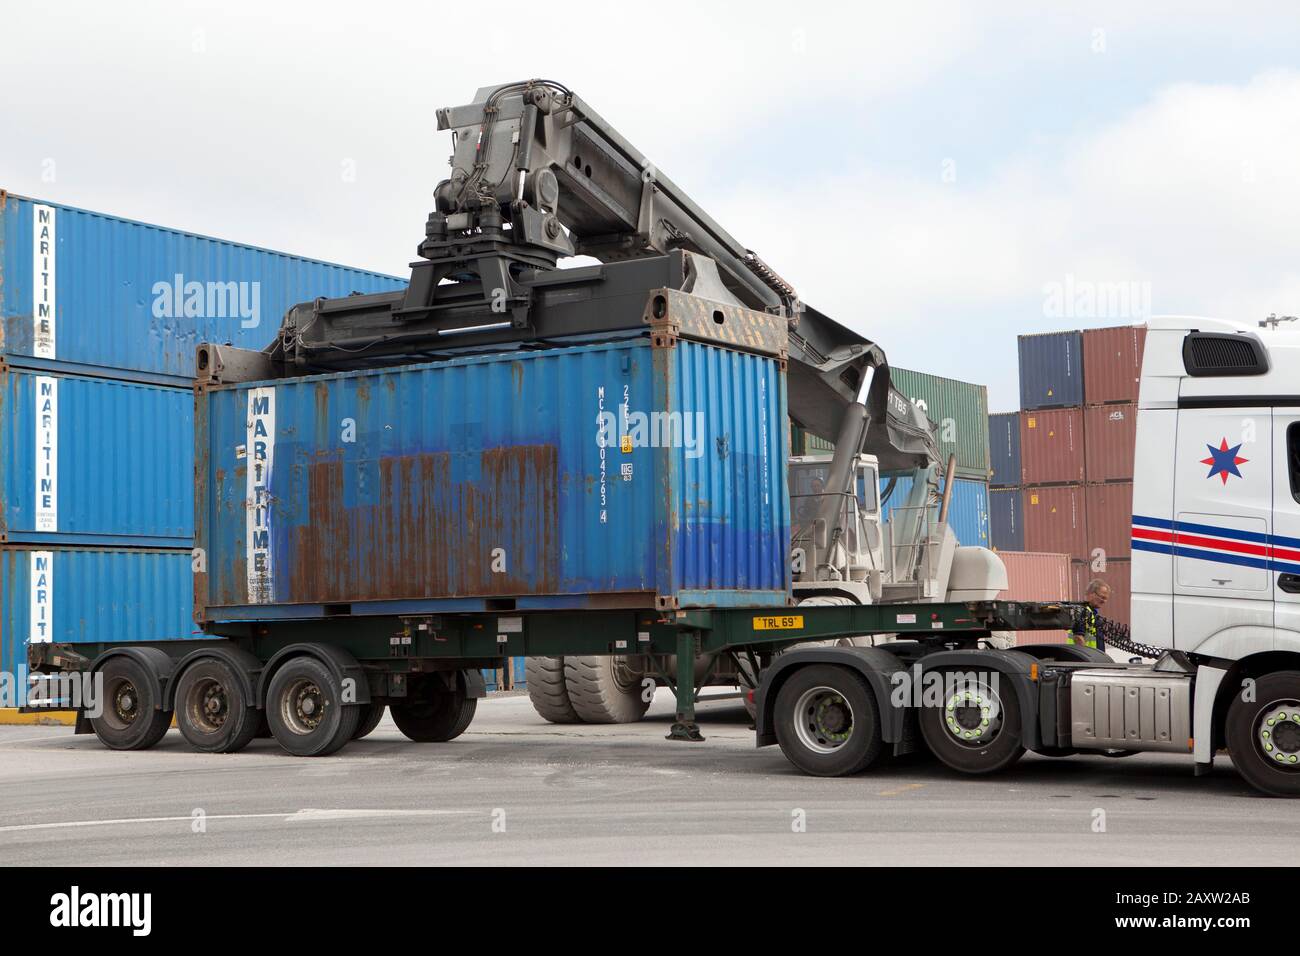 Container being loaded onto truck lorry Stock Photo